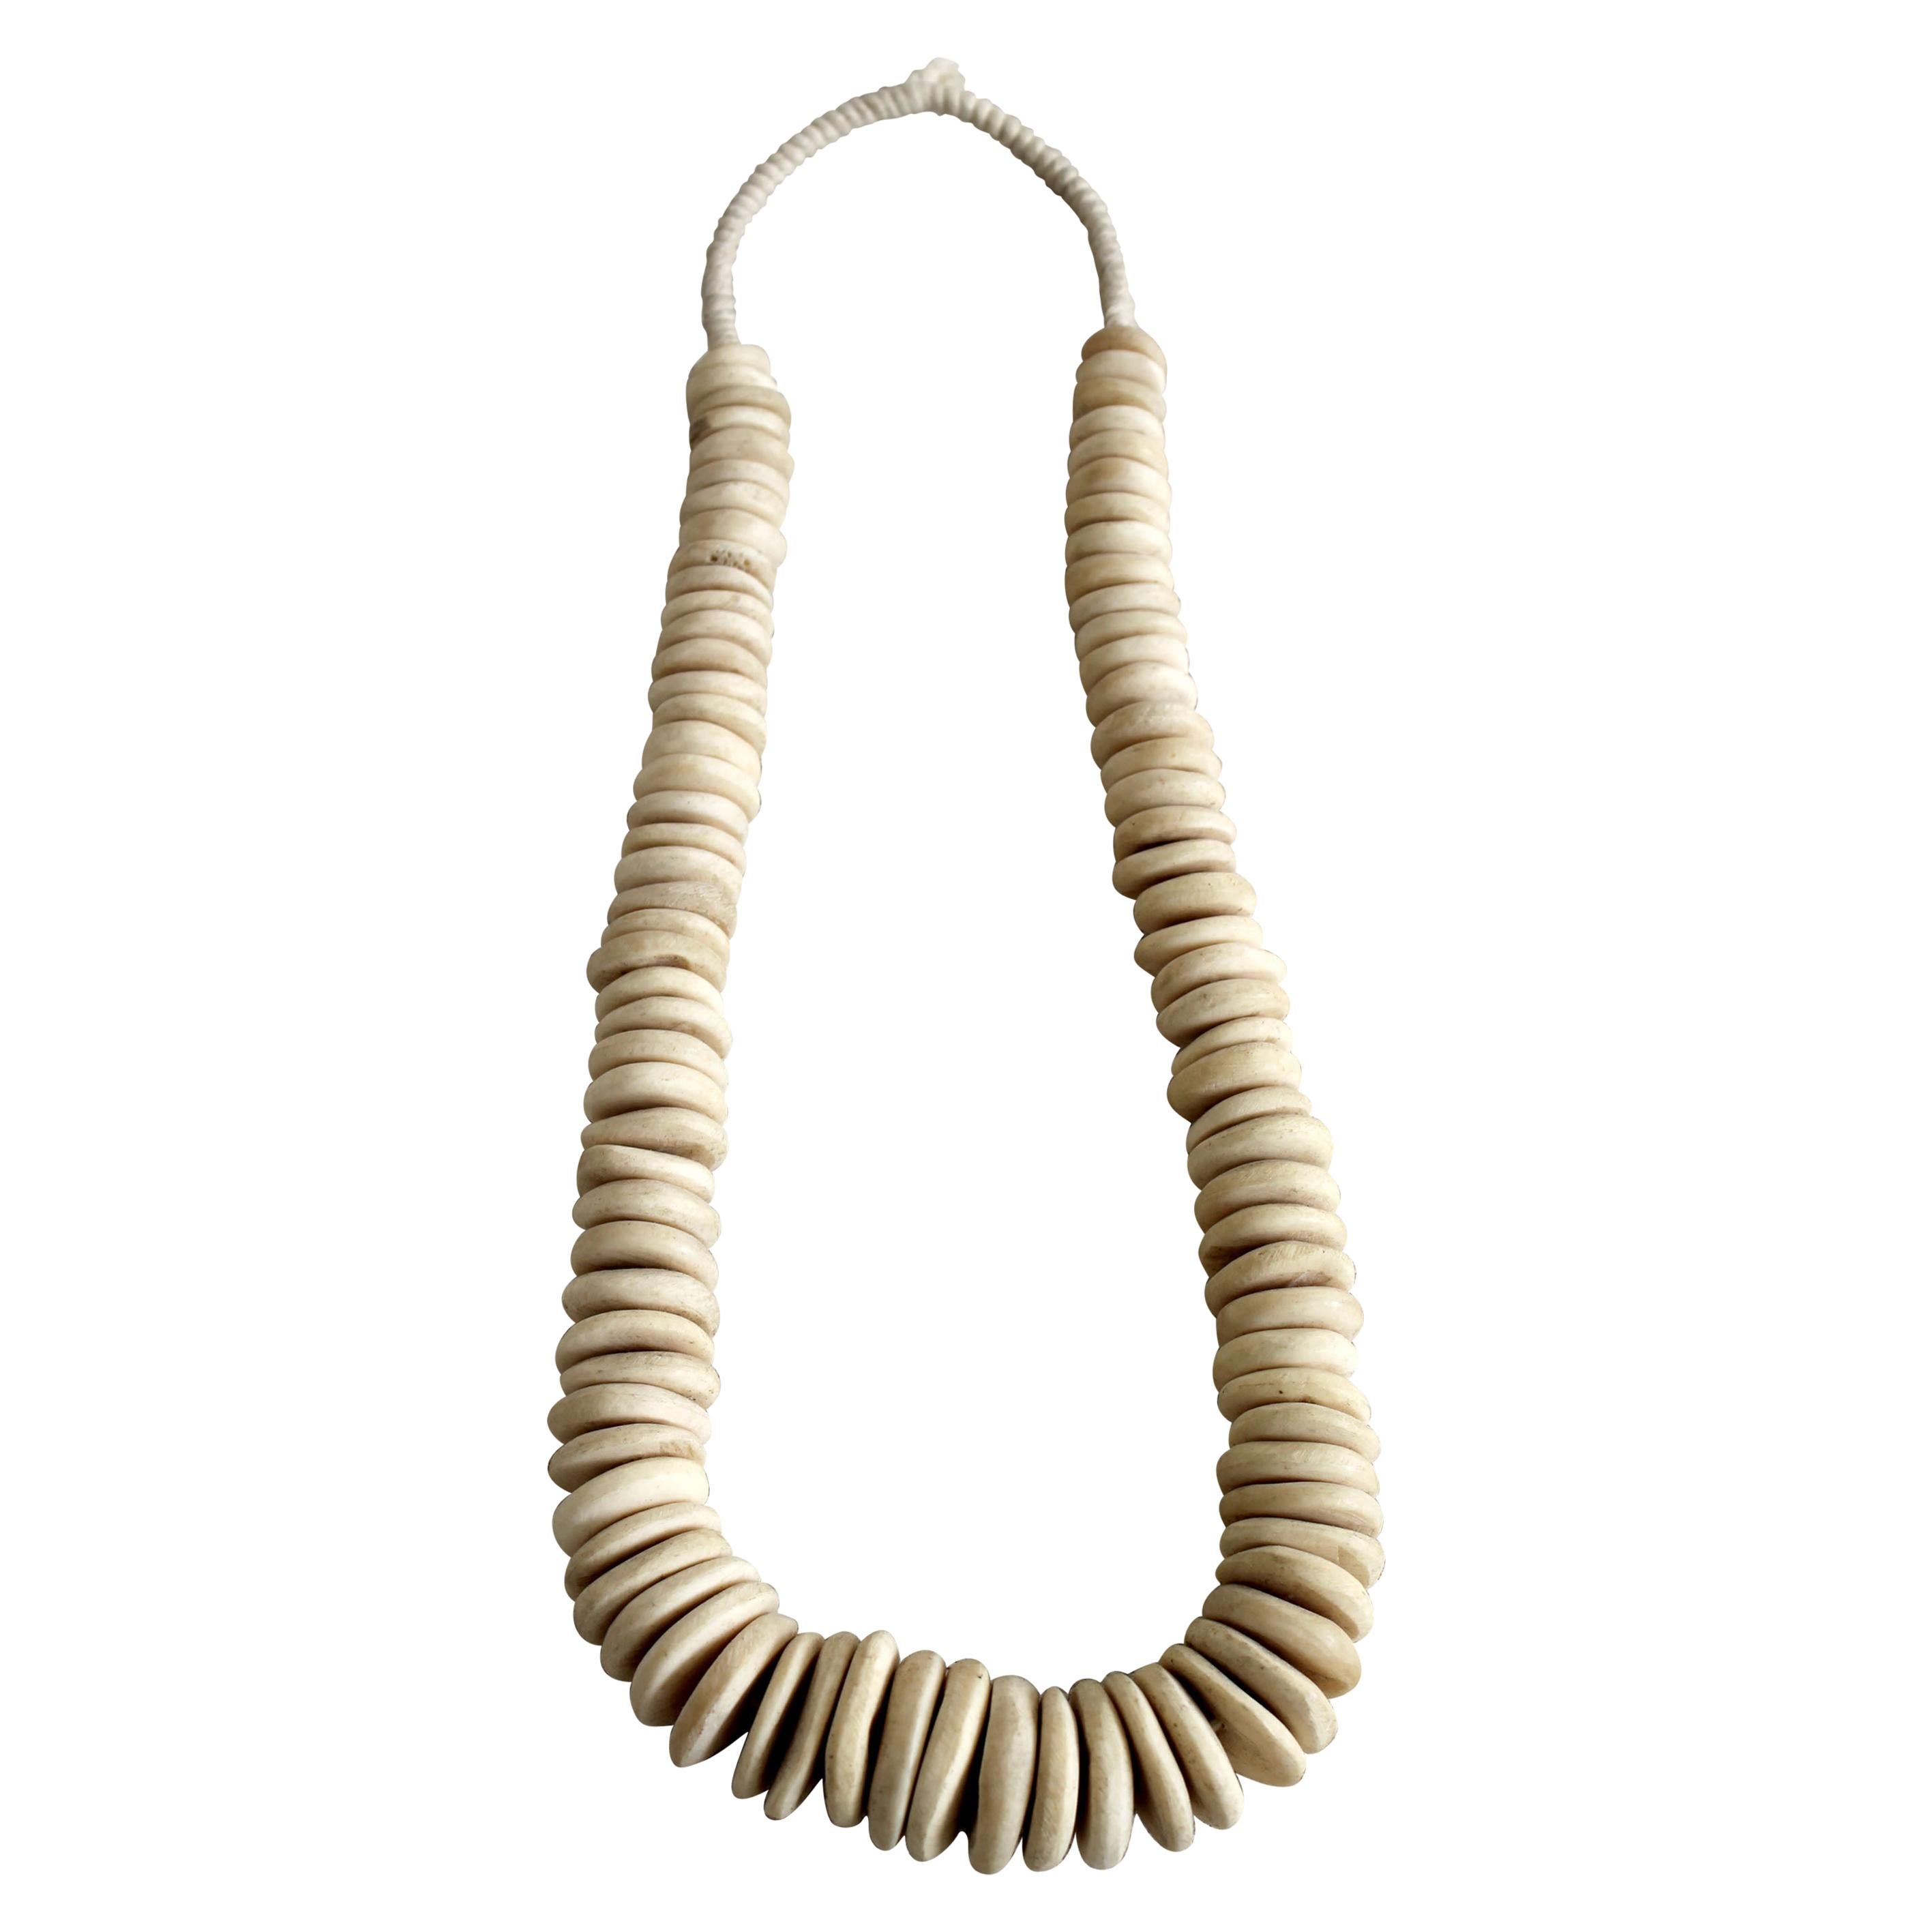 African Bone Beads in Natural